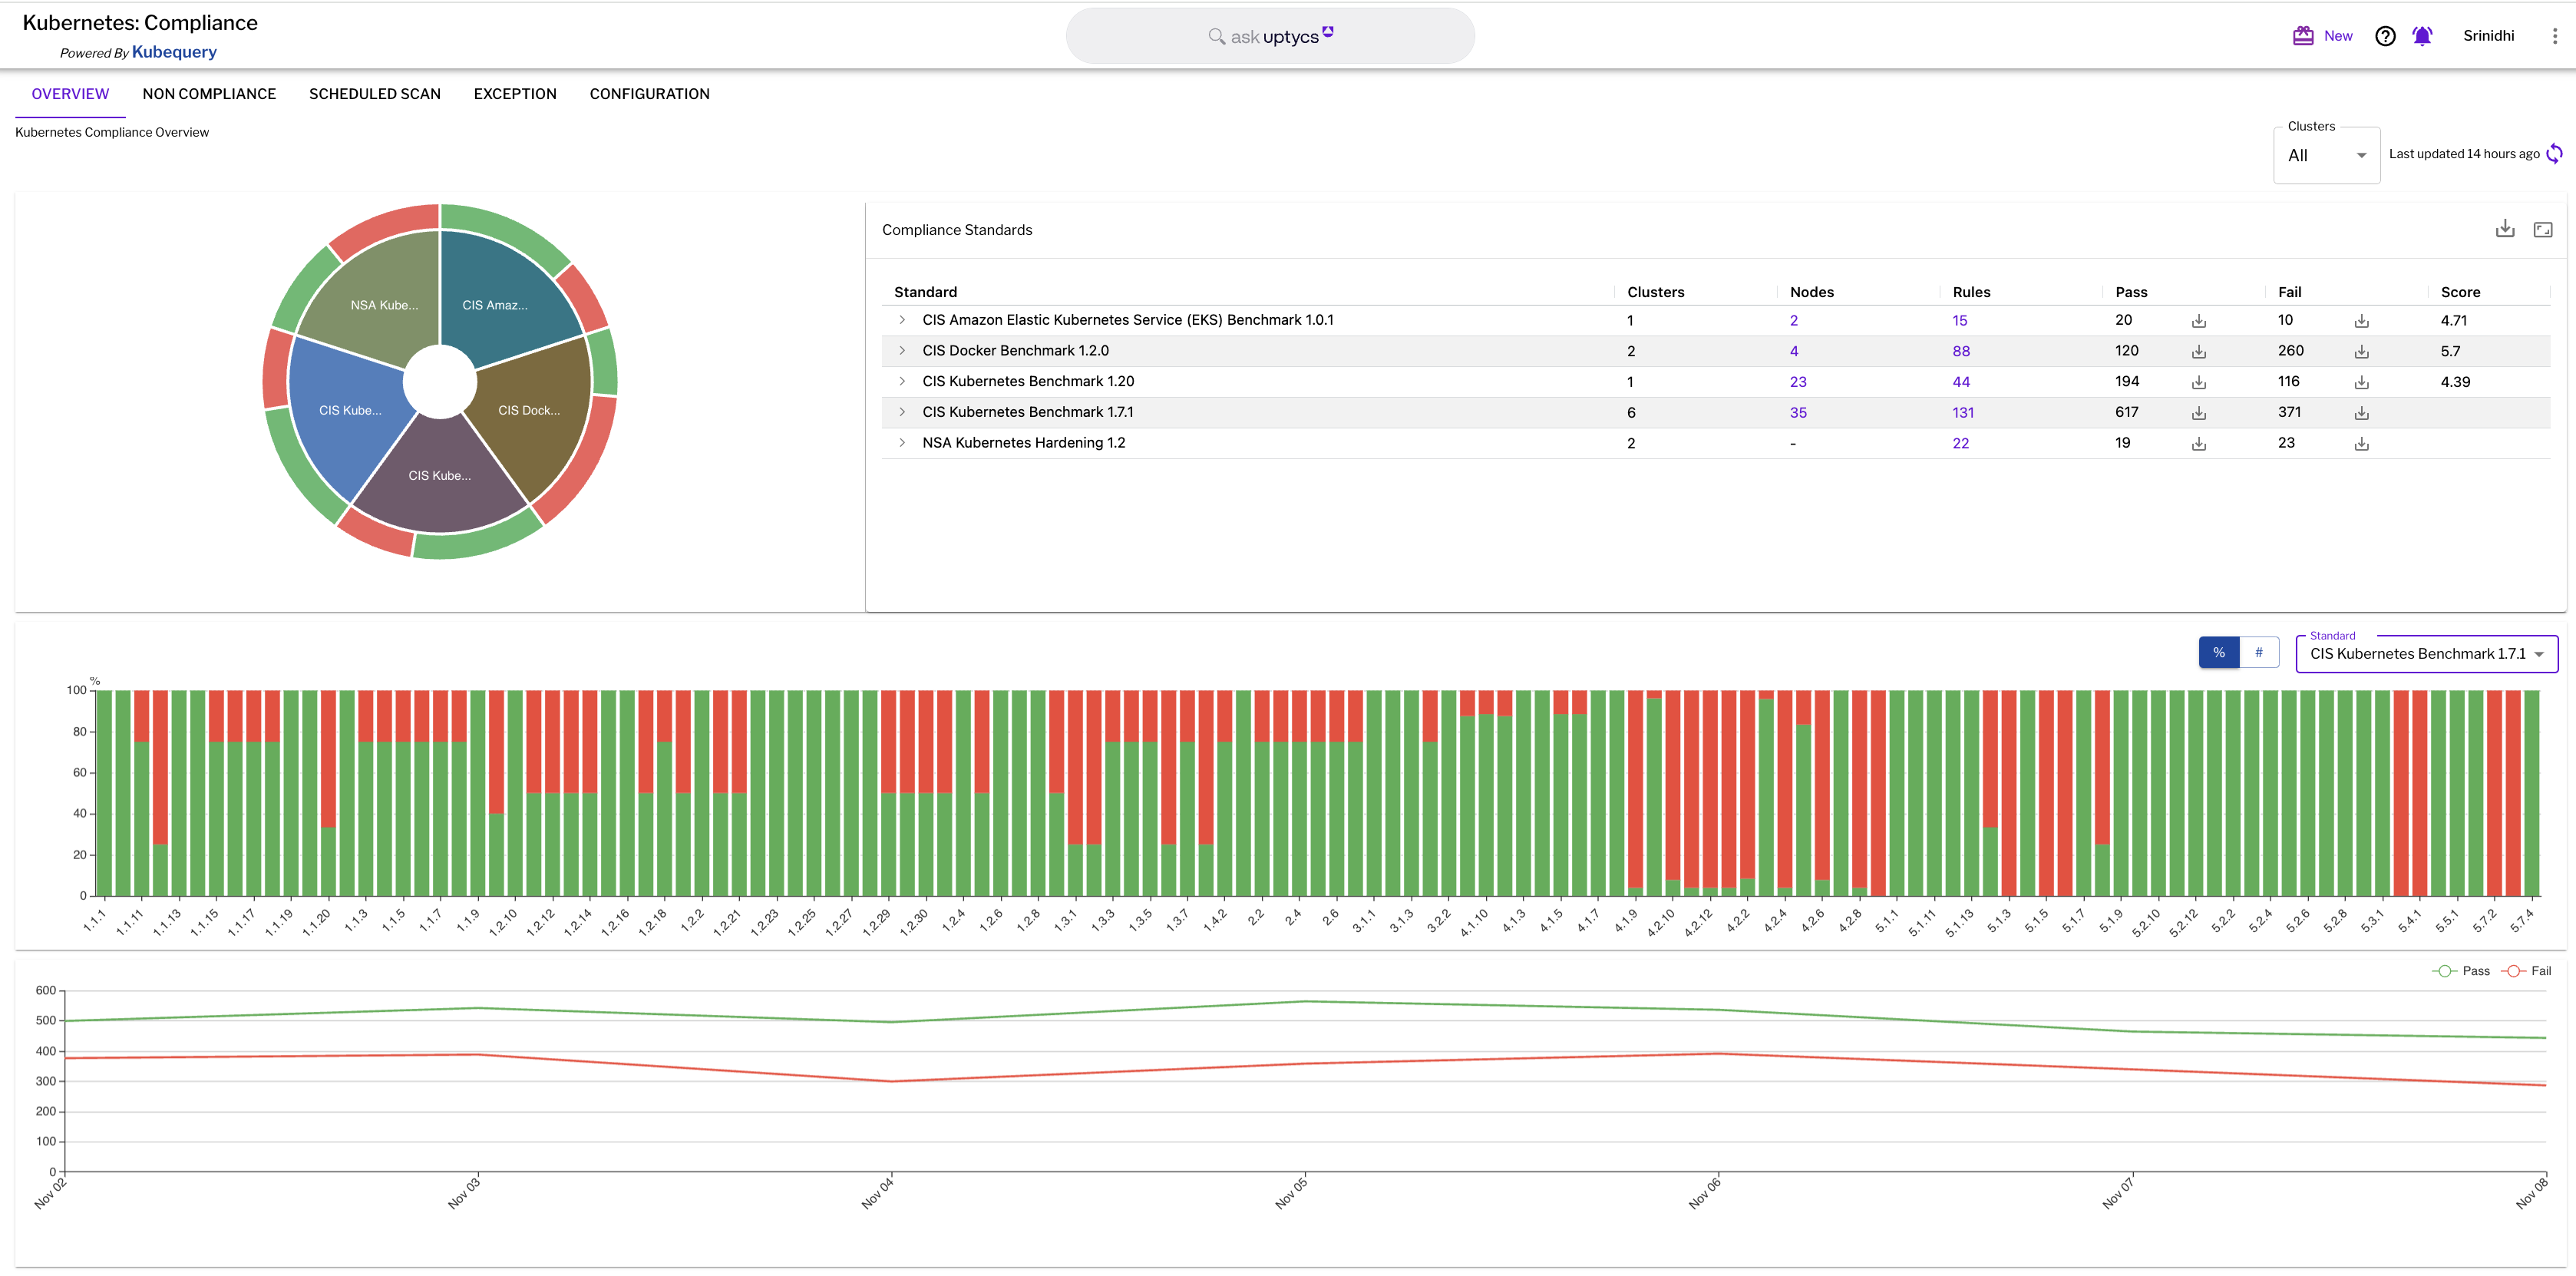 Figure 1 - Uptycs Kubernetes compliance console showing CIS benchmarks